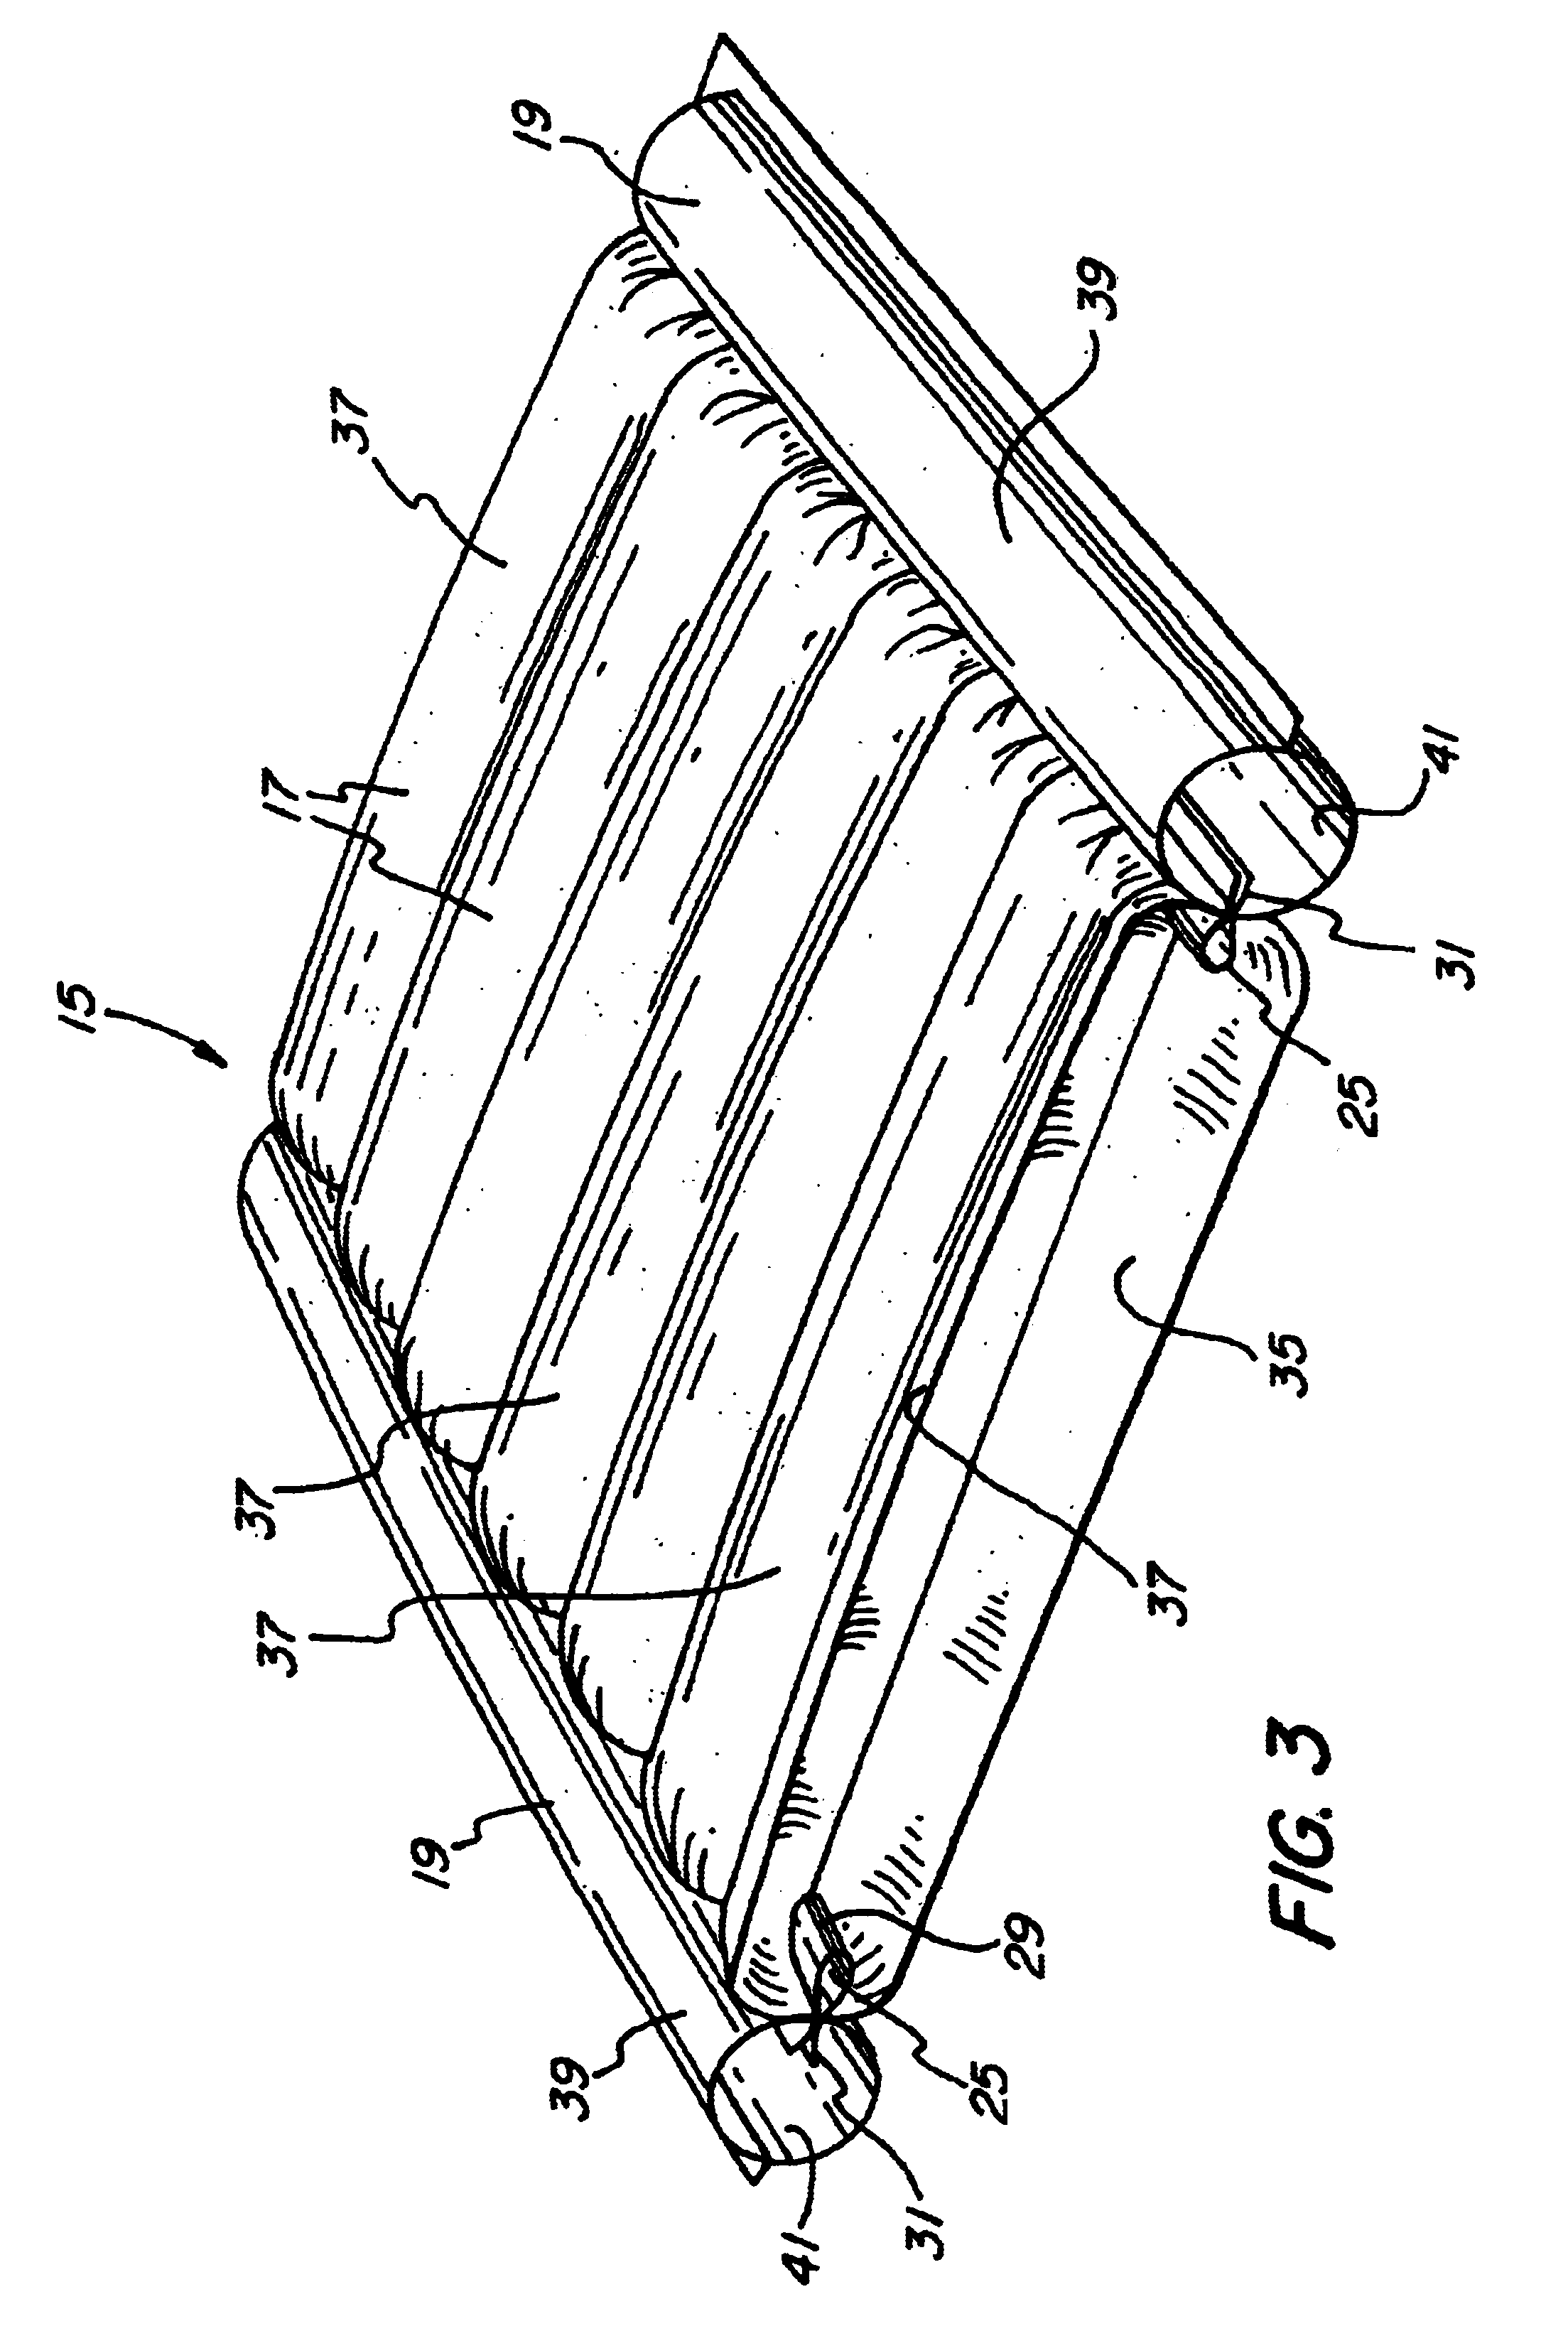 Inflatable mattress systems and method of manufacture thereof